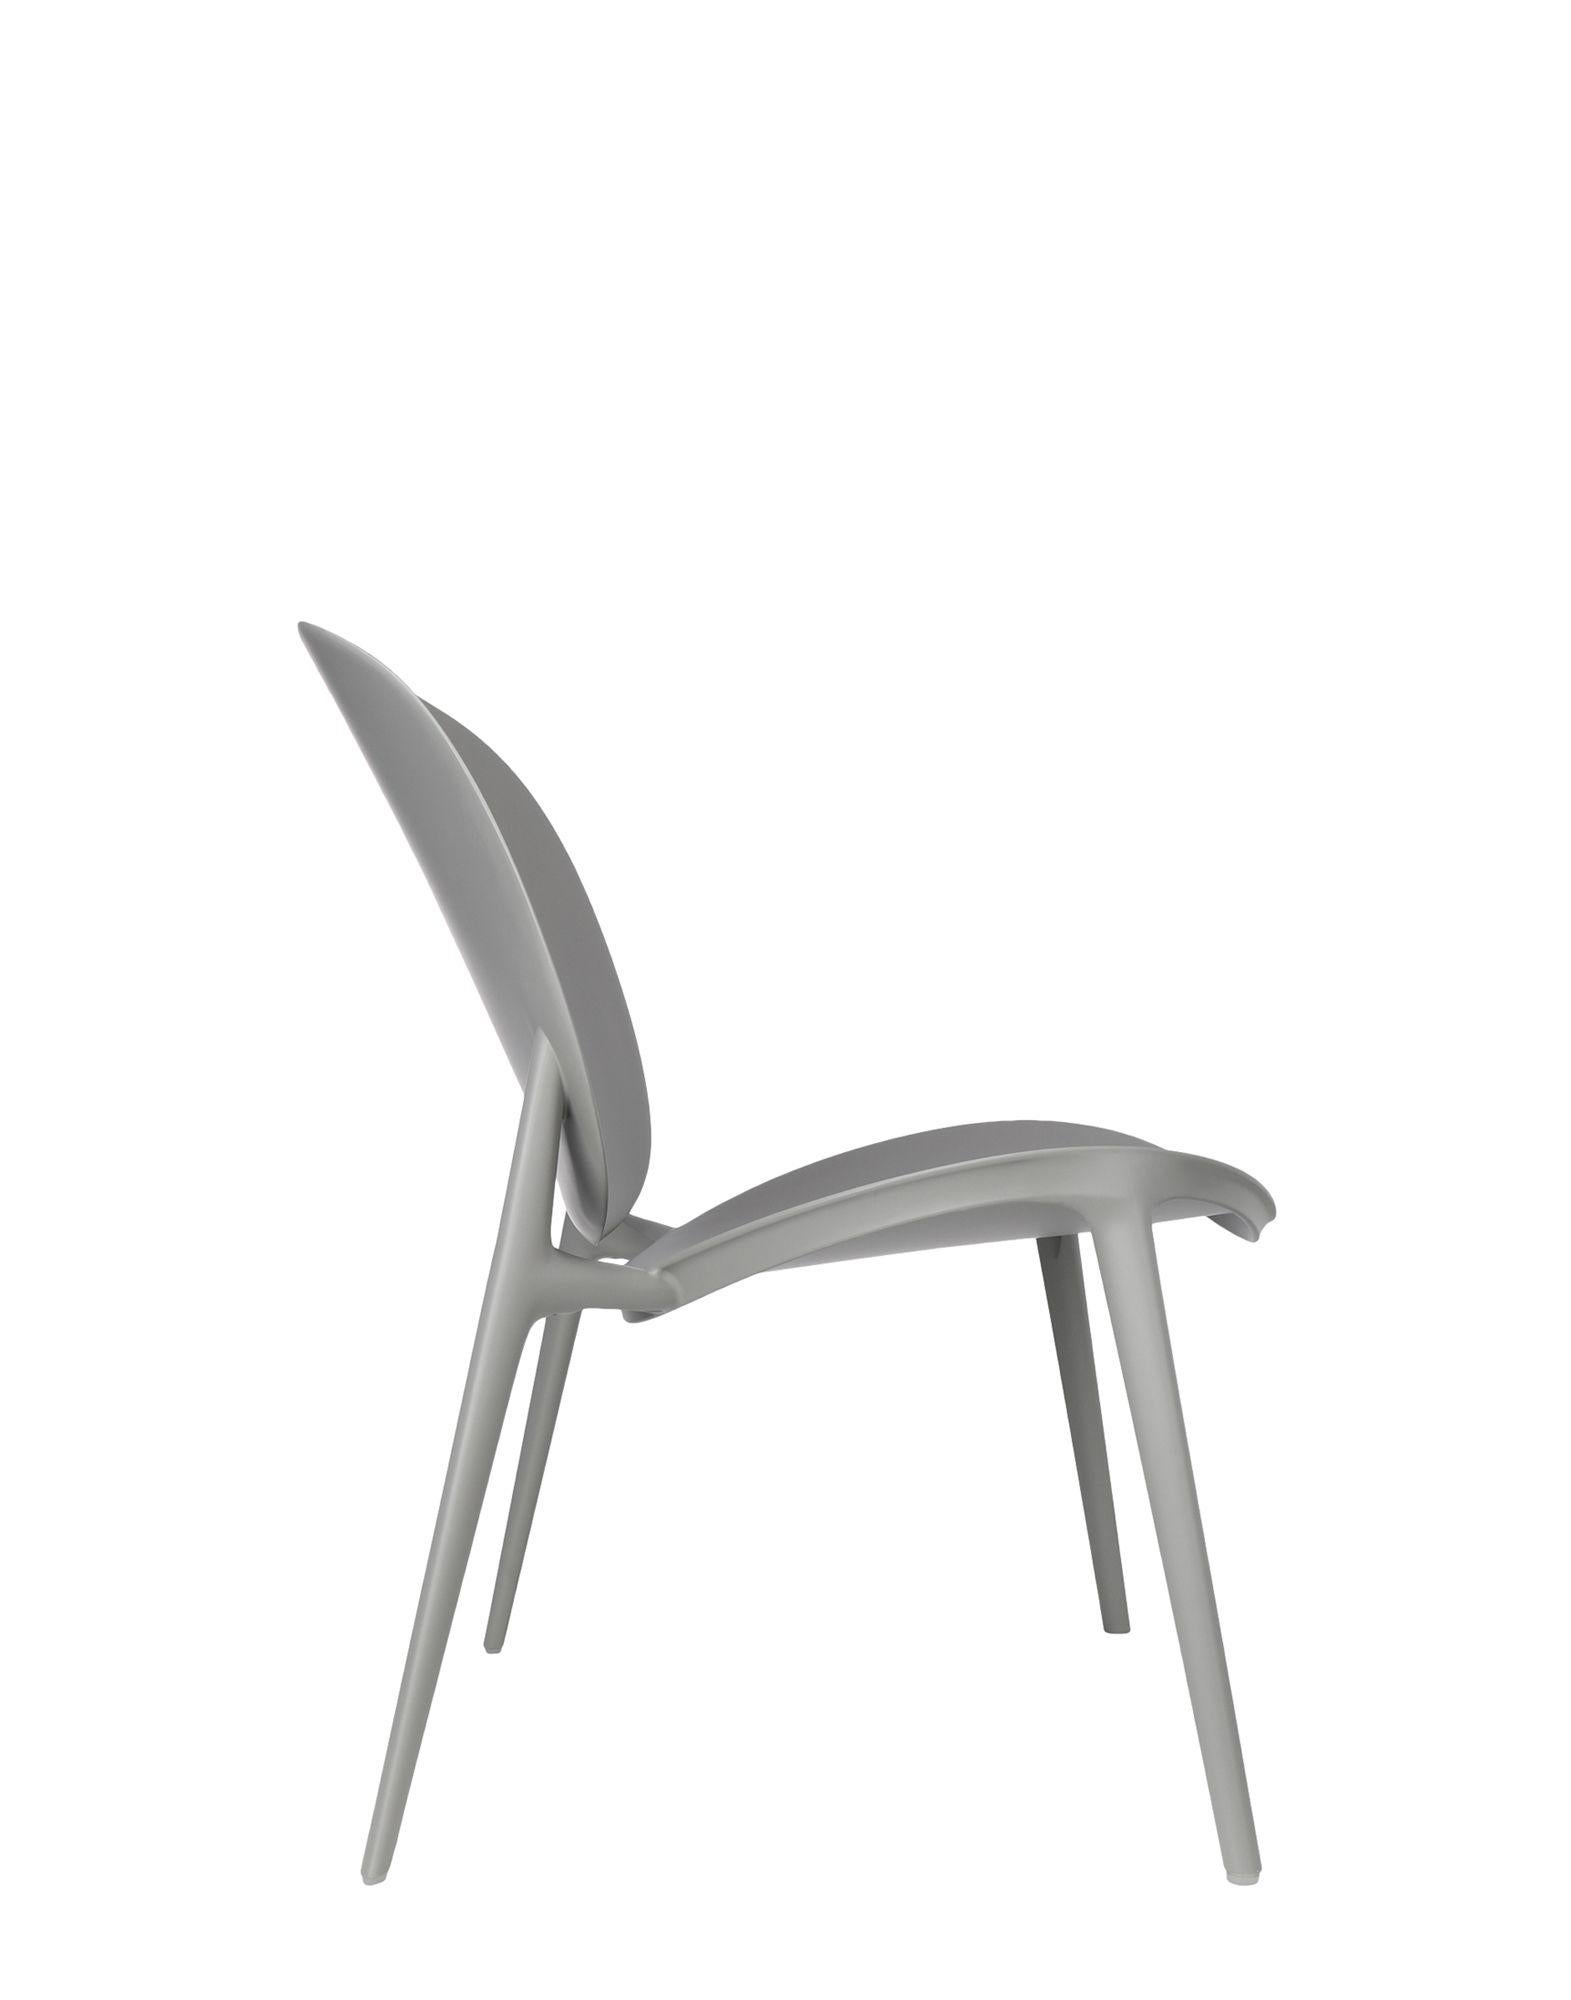 Kartell Be Bop in Grey by Ludovica + Roberta Palomba In New Condition For Sale In Brooklyn, NY